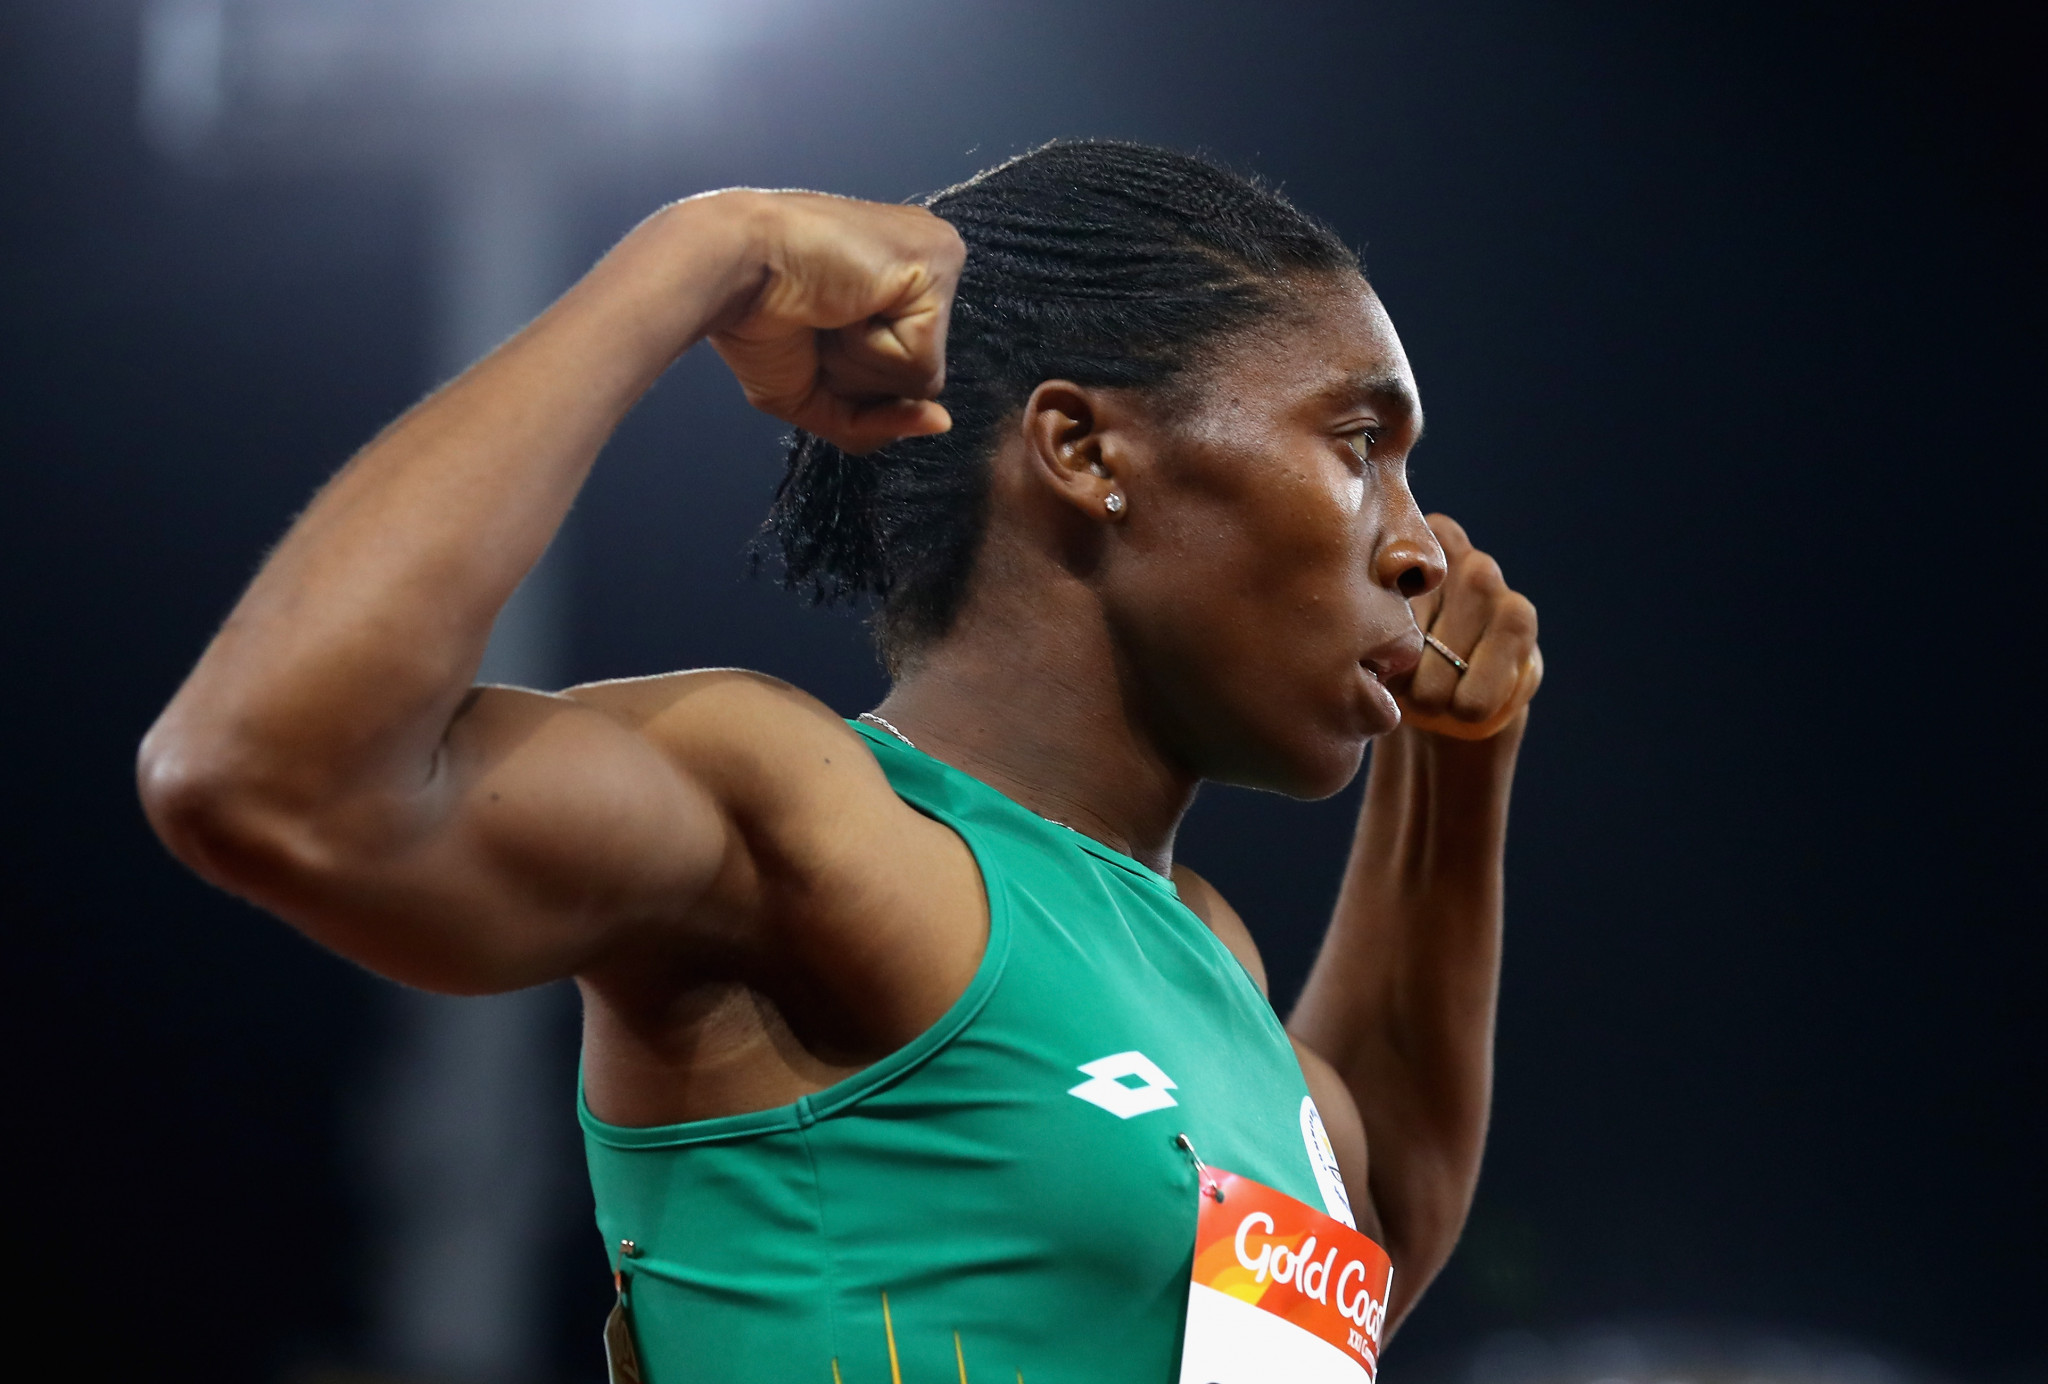 Caster Semenya has hit back at the IAAF over their recent ruling which threatens her reign at the top ©Getty Images